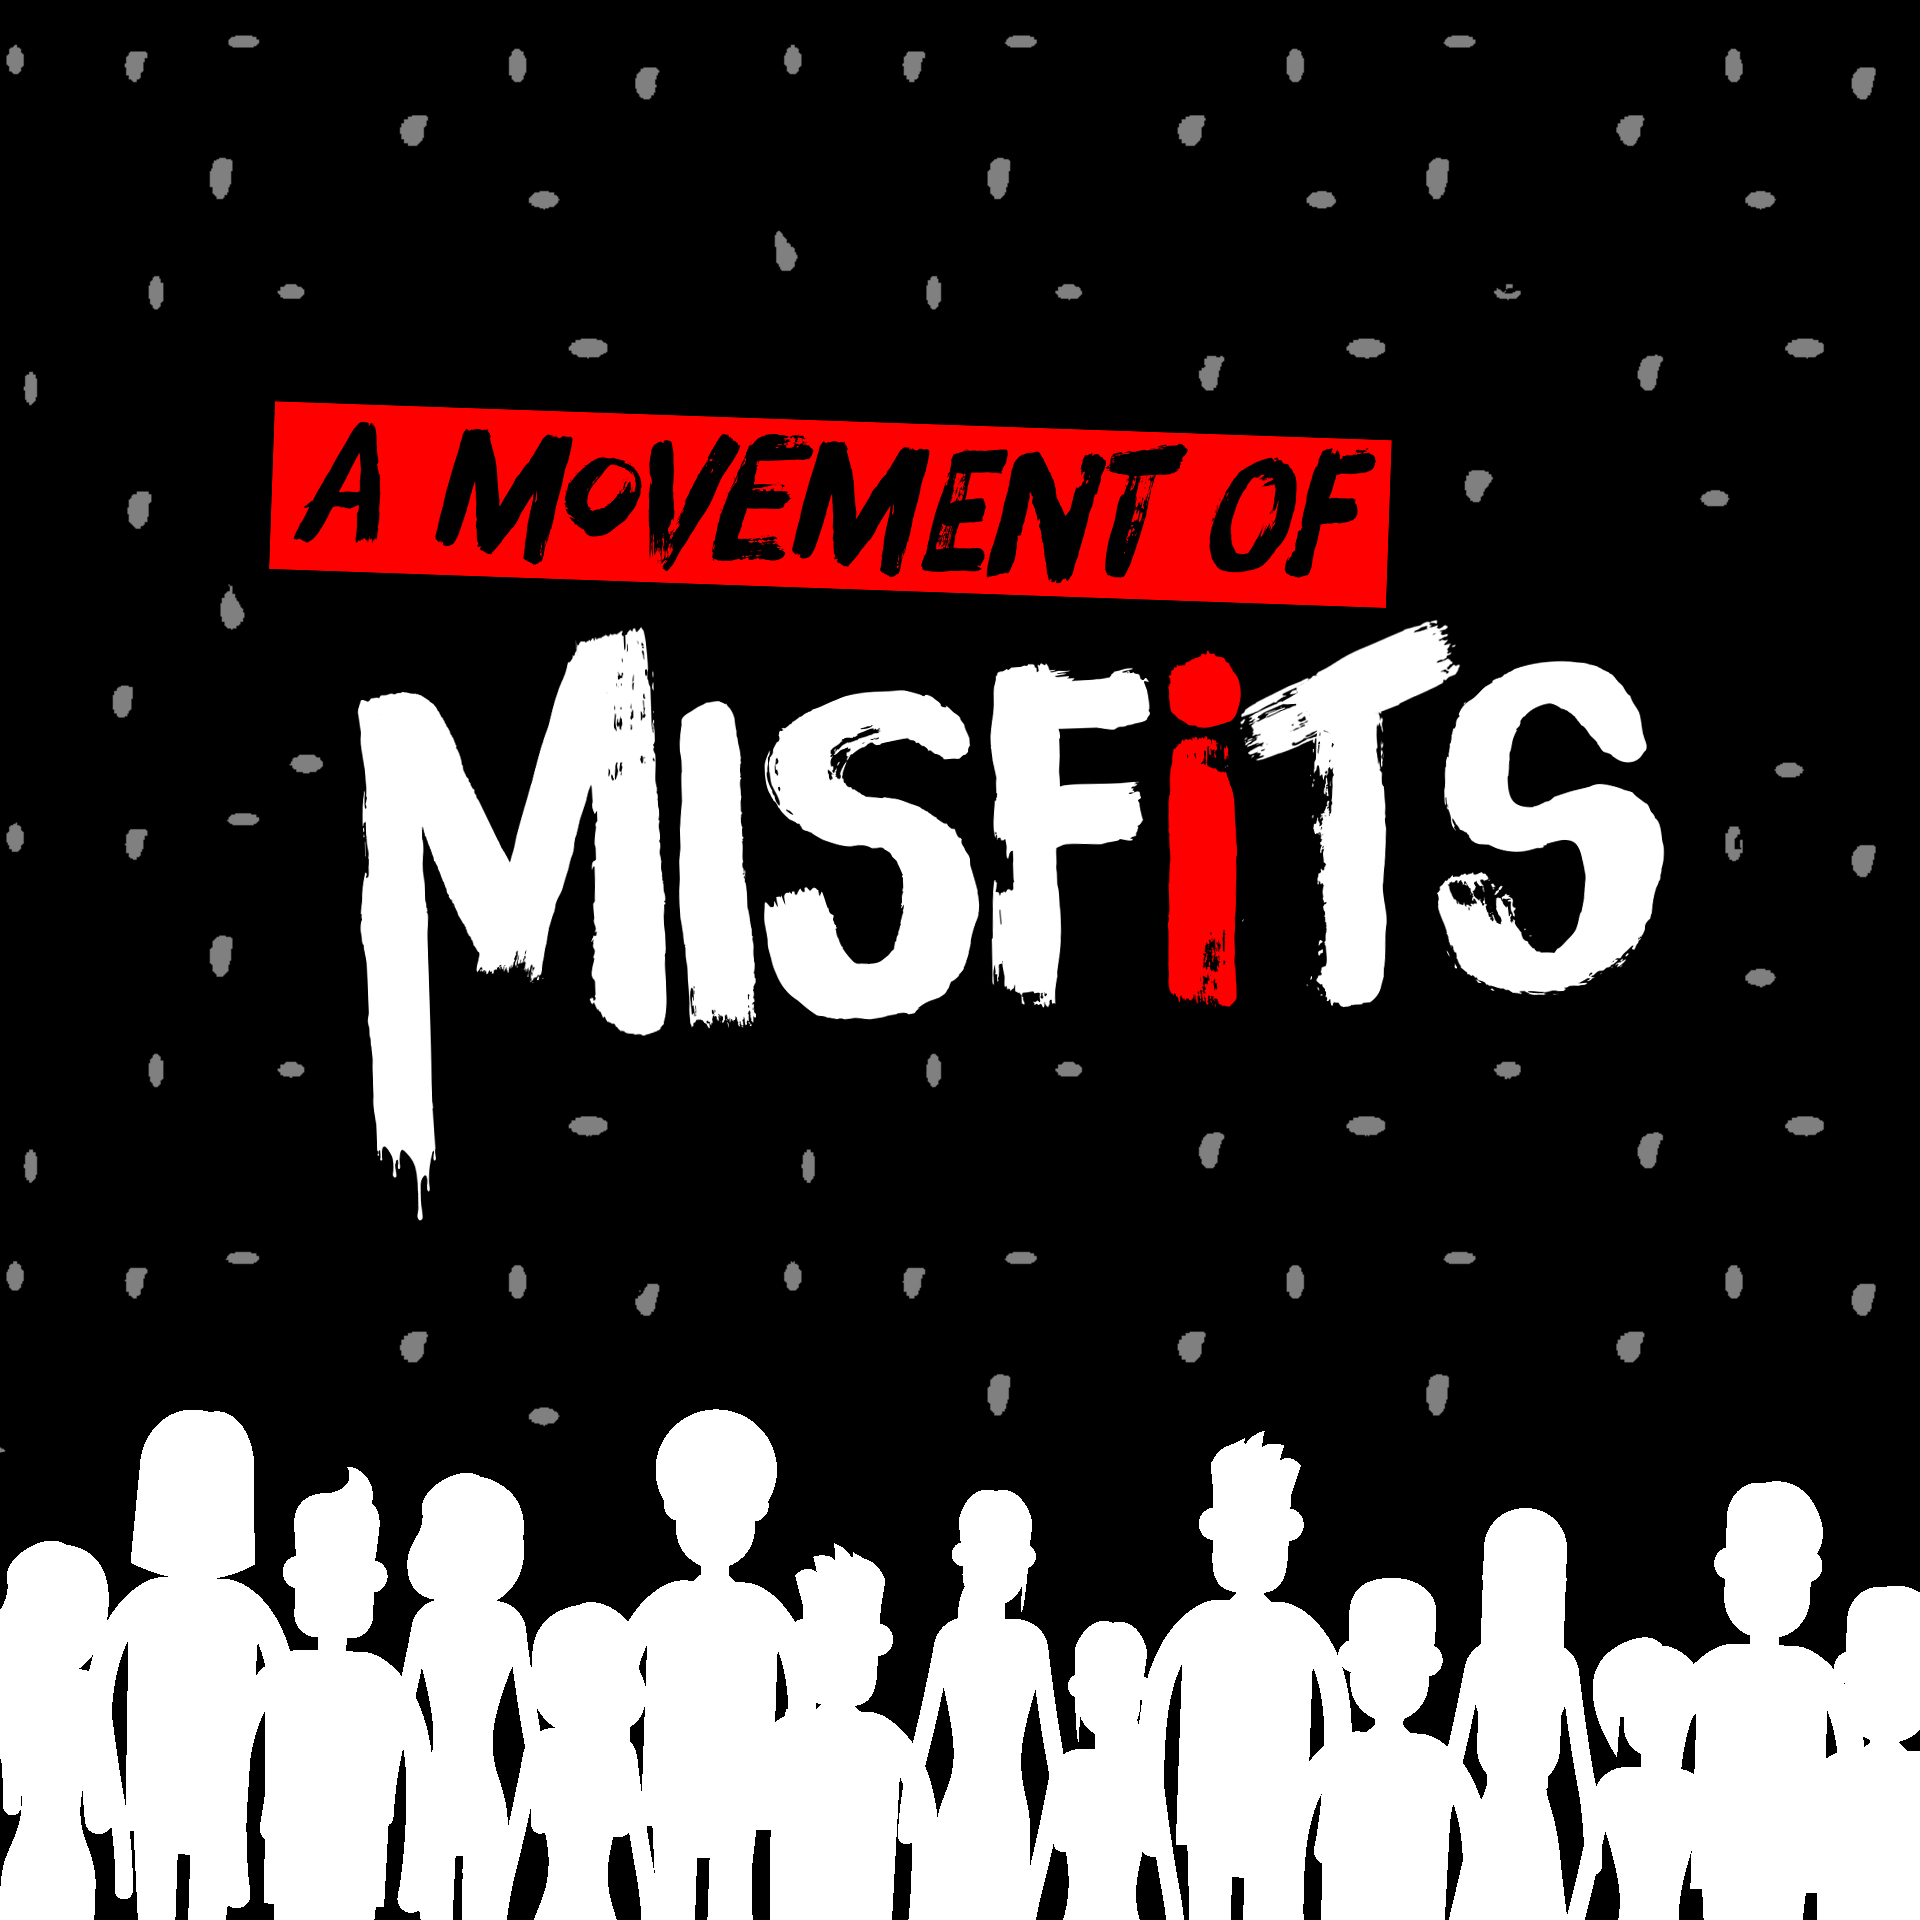 A Movement of Misfits #3: Acts 3:12-26